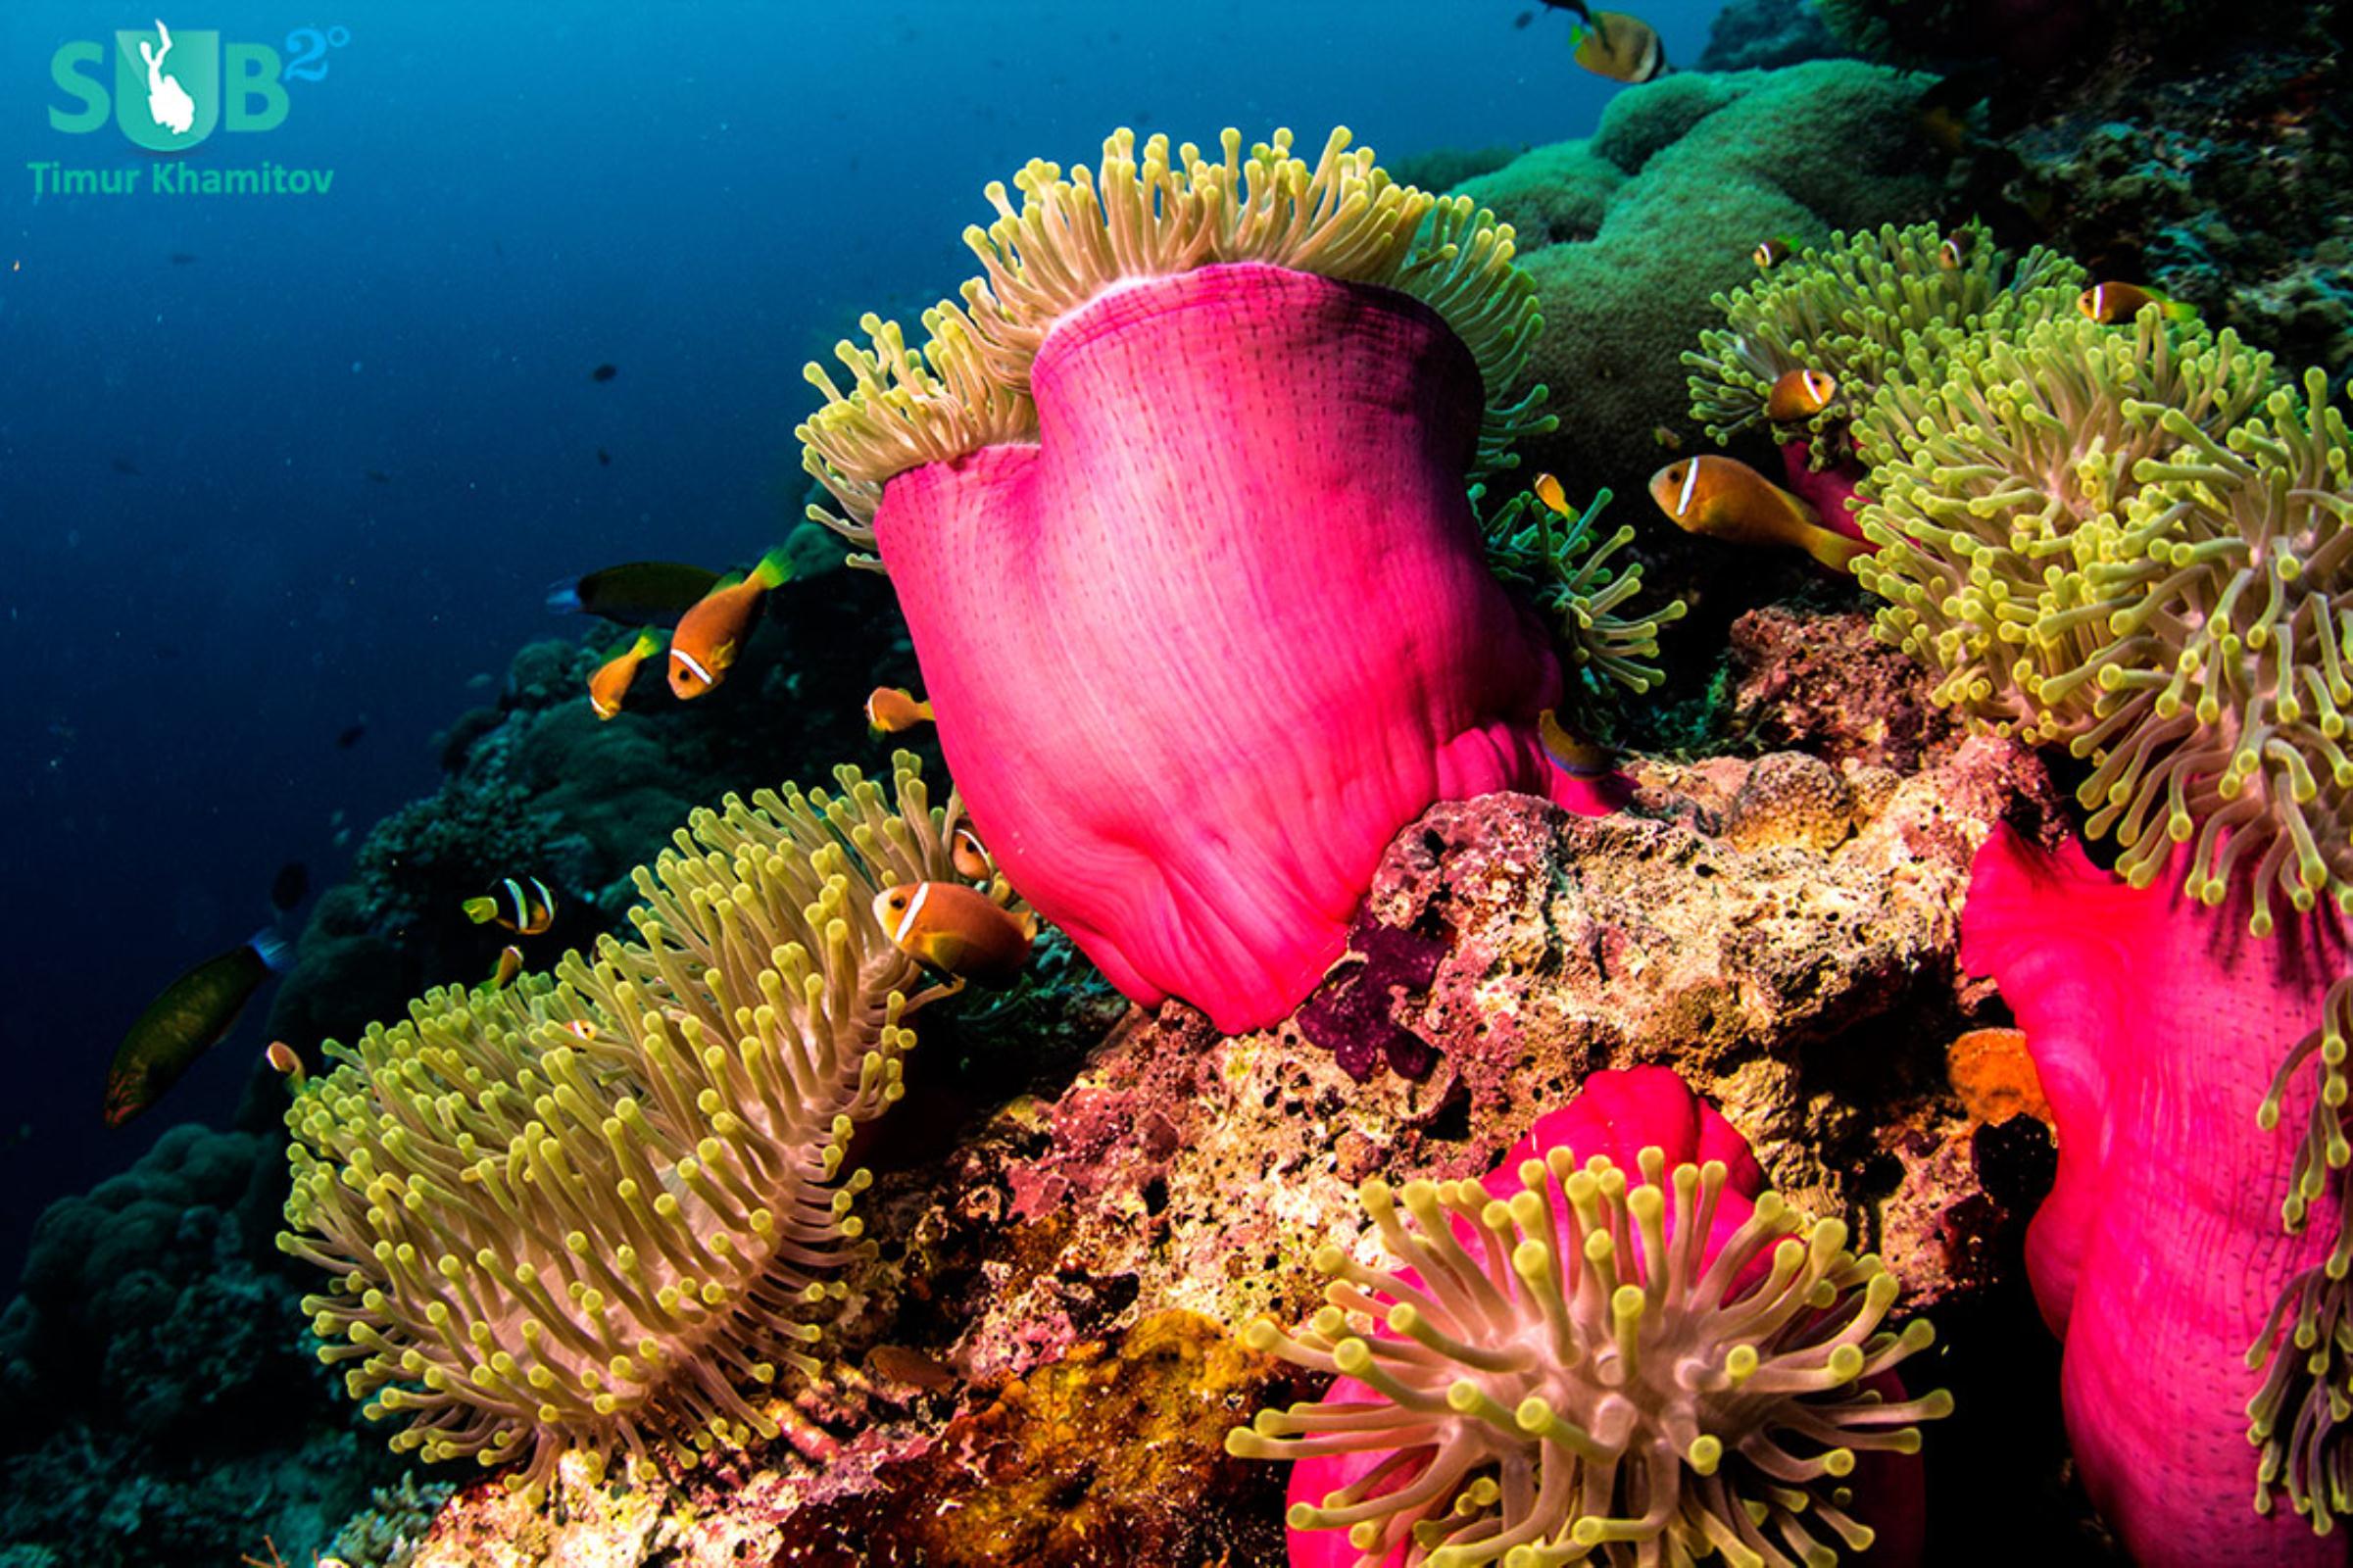 You'll find beautiful, healthy and colorful corals growing underwater in Malaysia, coupled with a diverse marine life.  